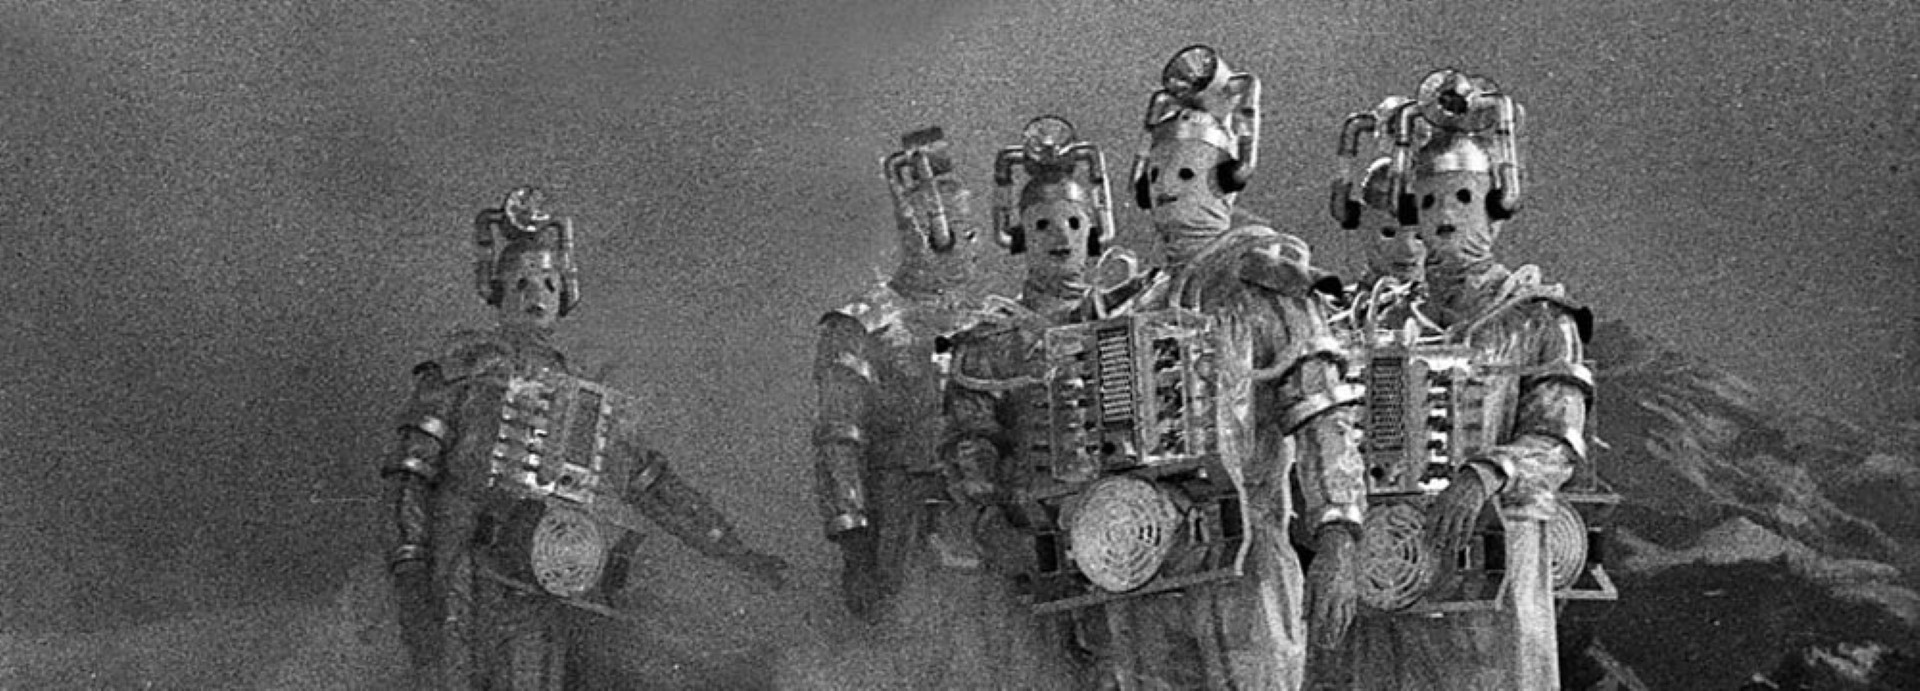 The Tenth Planet